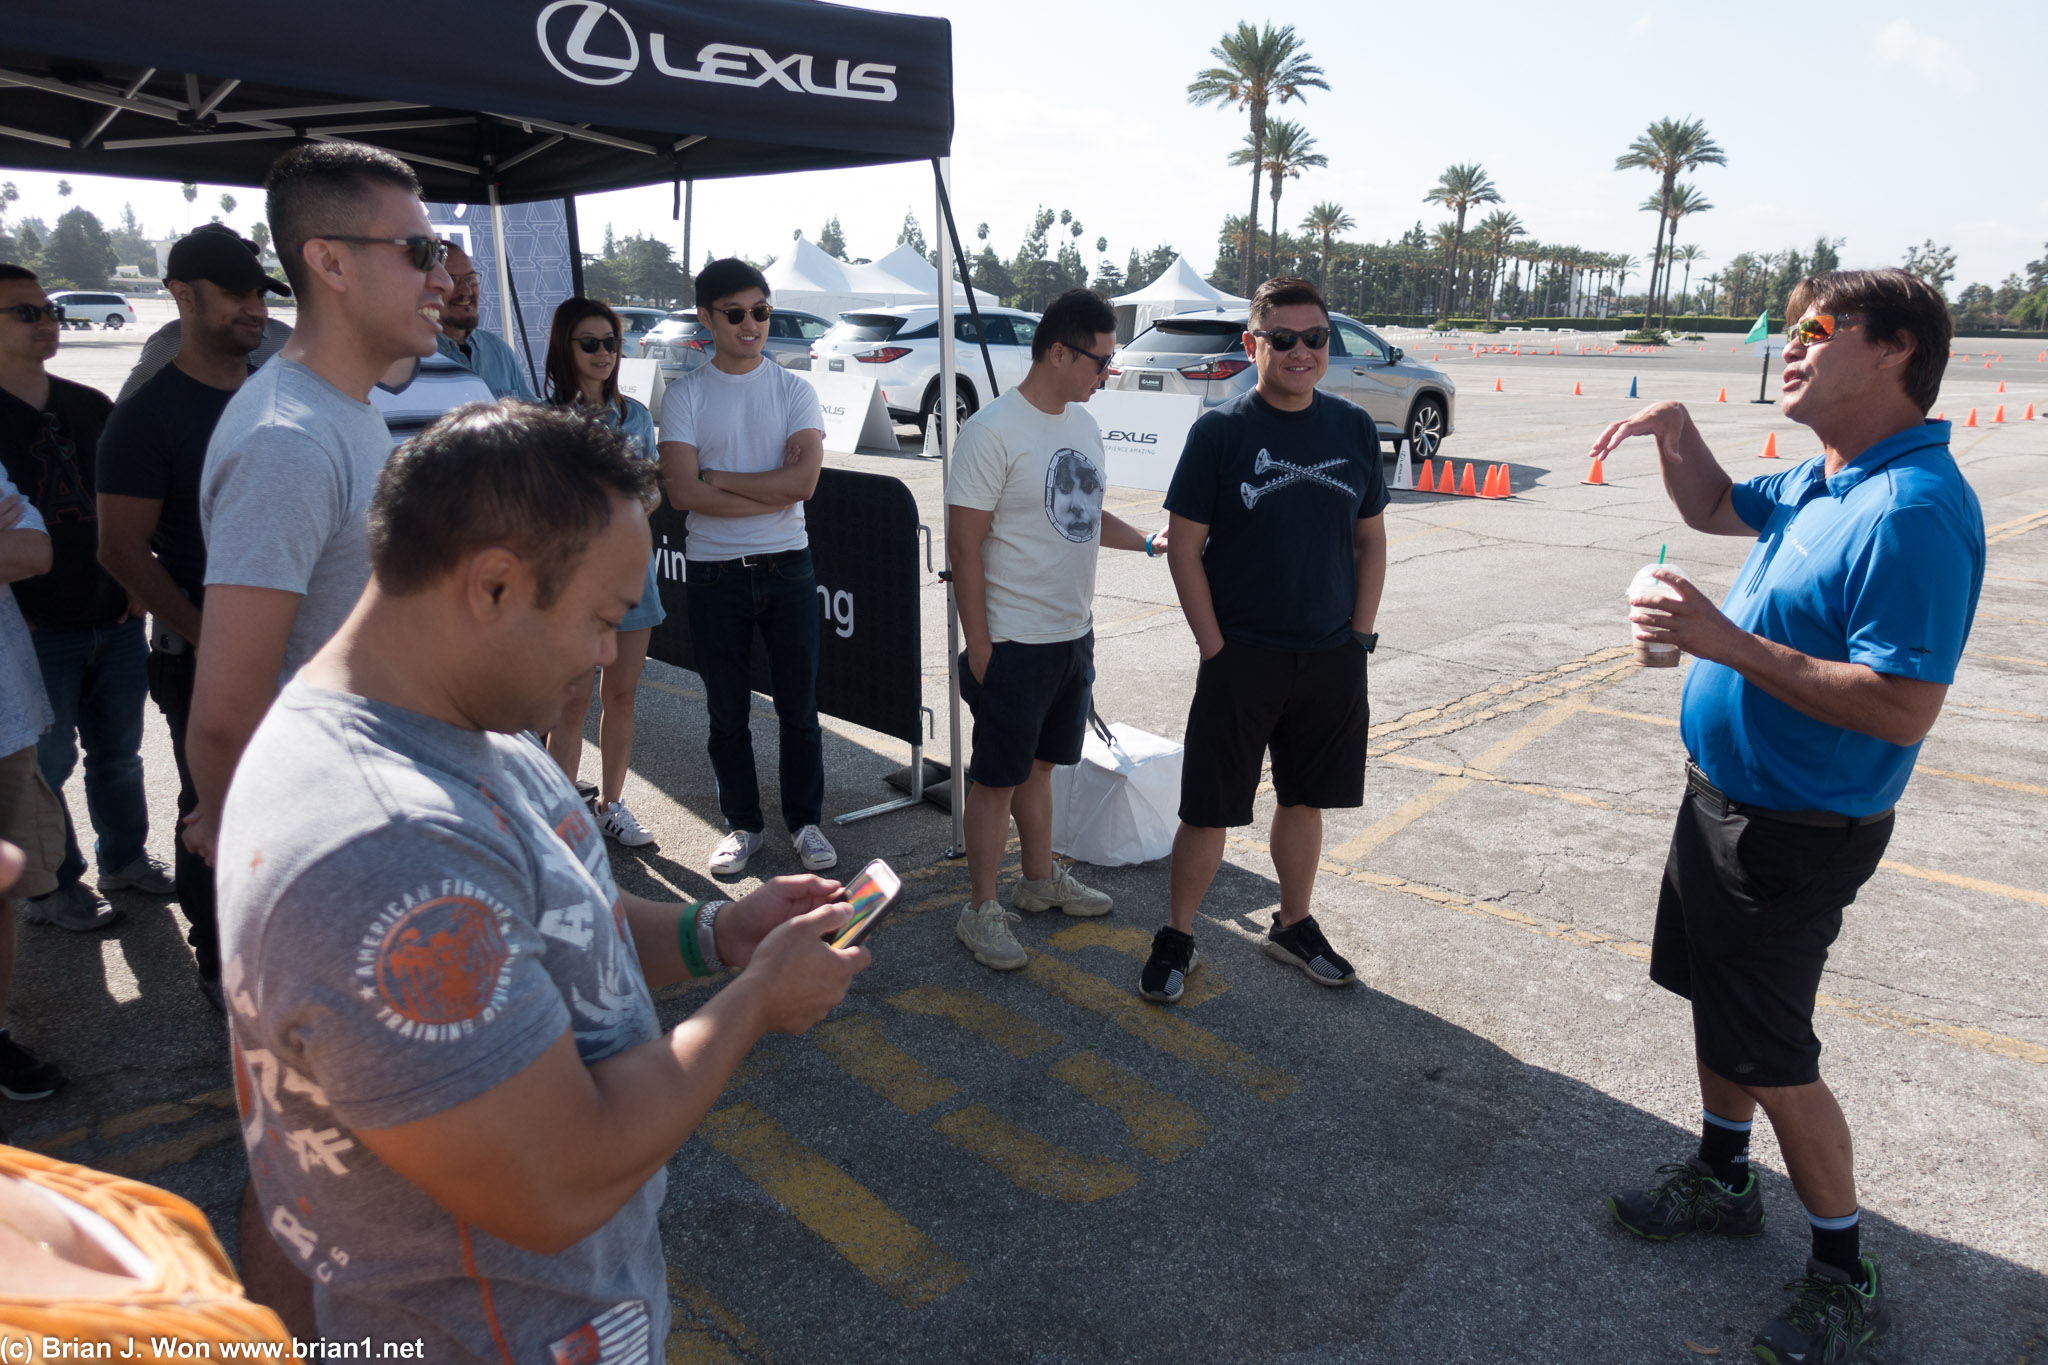 Explaining the autocross. They let you drive unsupervised...